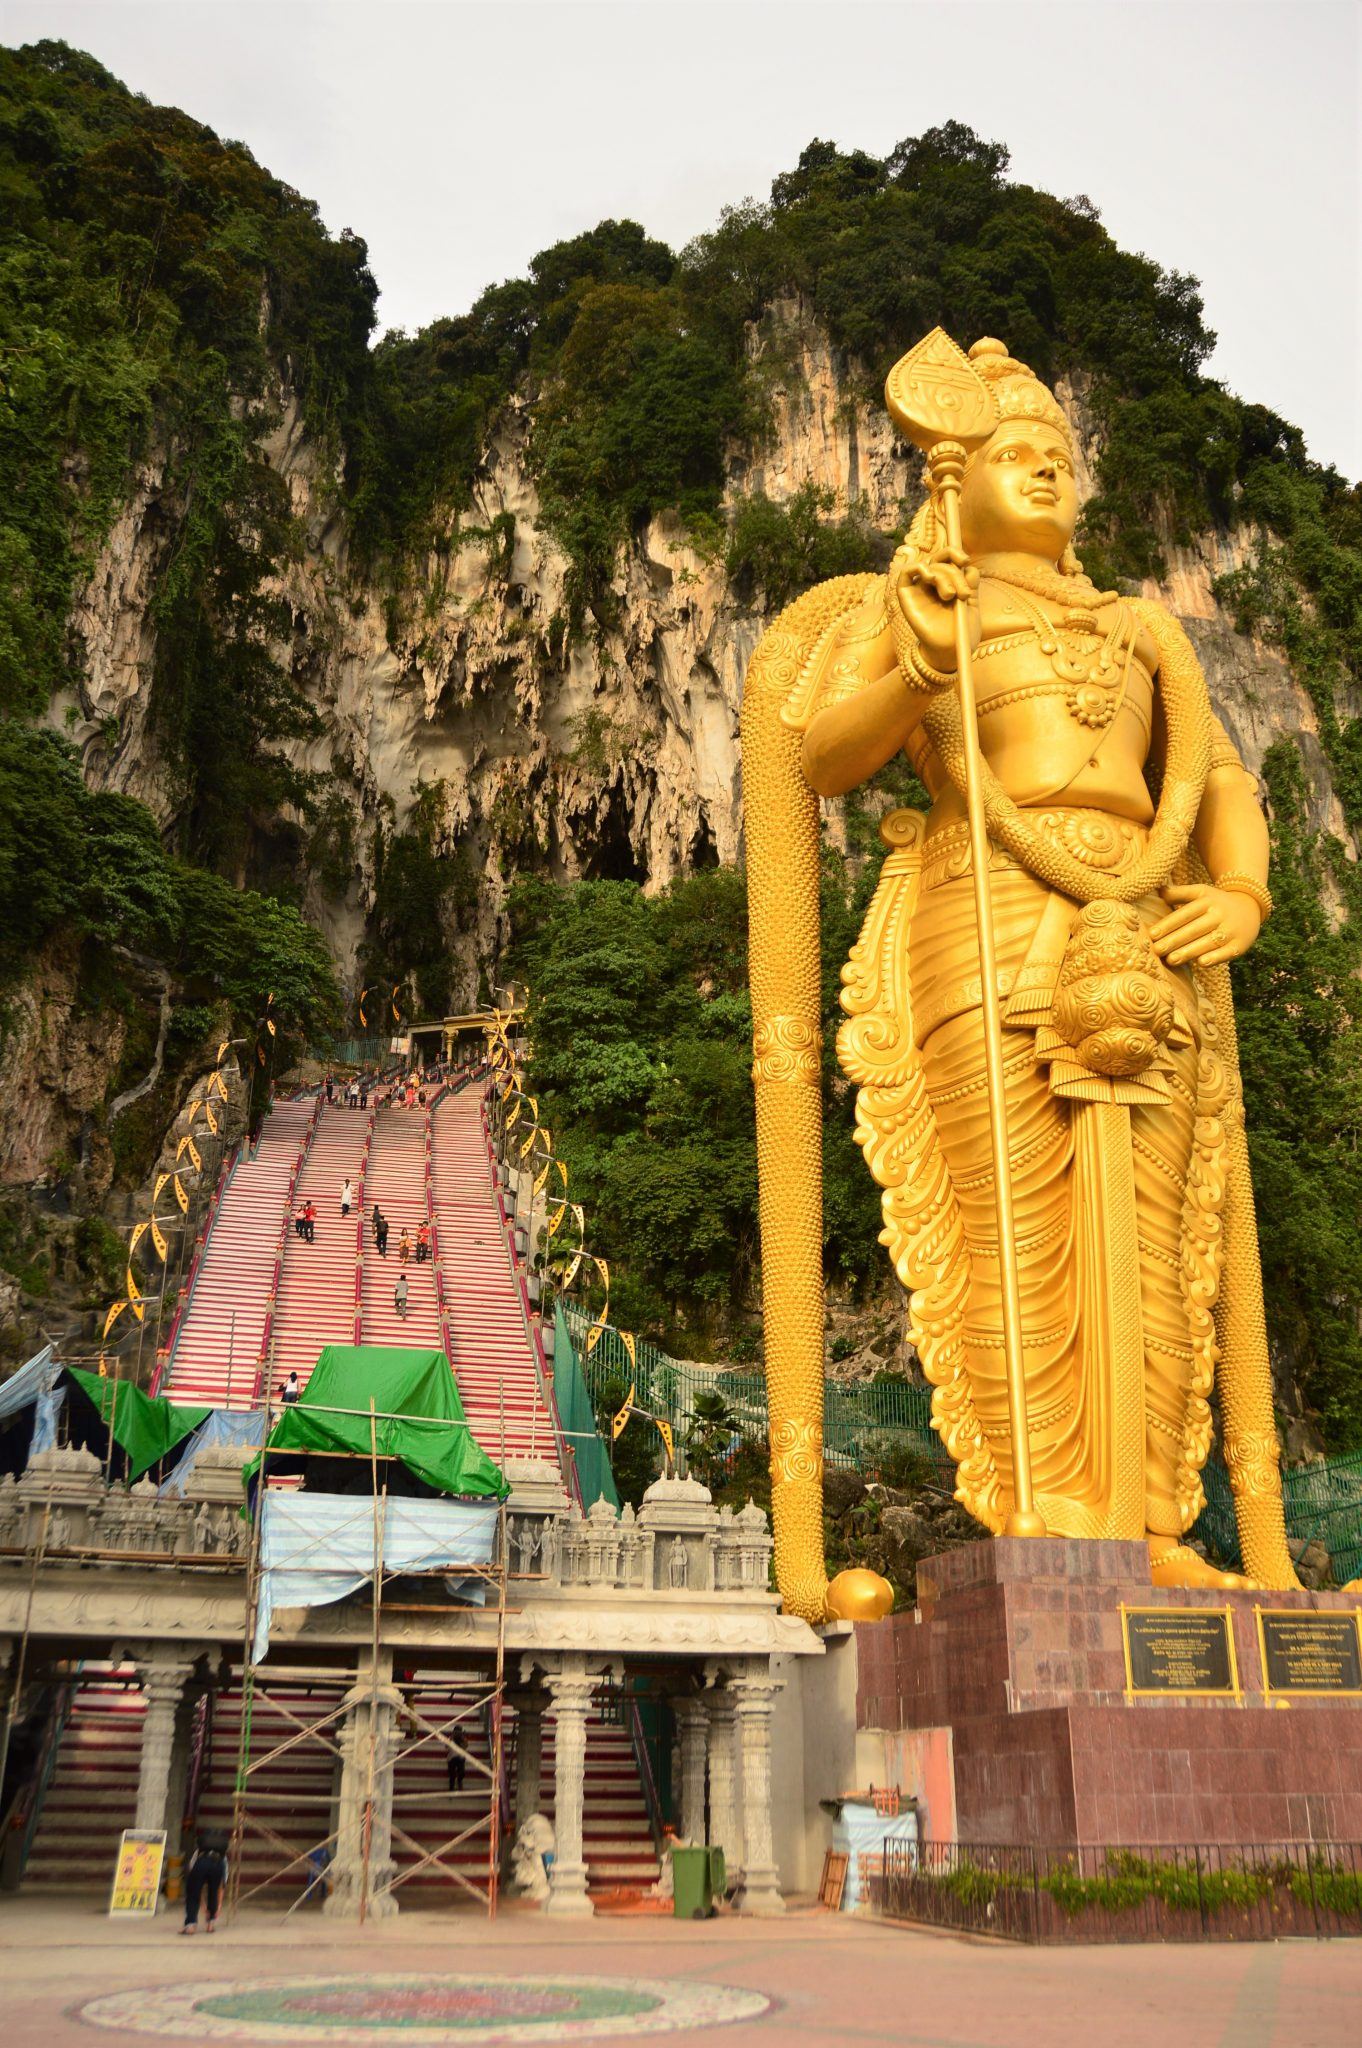 The very impressive entrance to Batu Caves most developing countries in the world